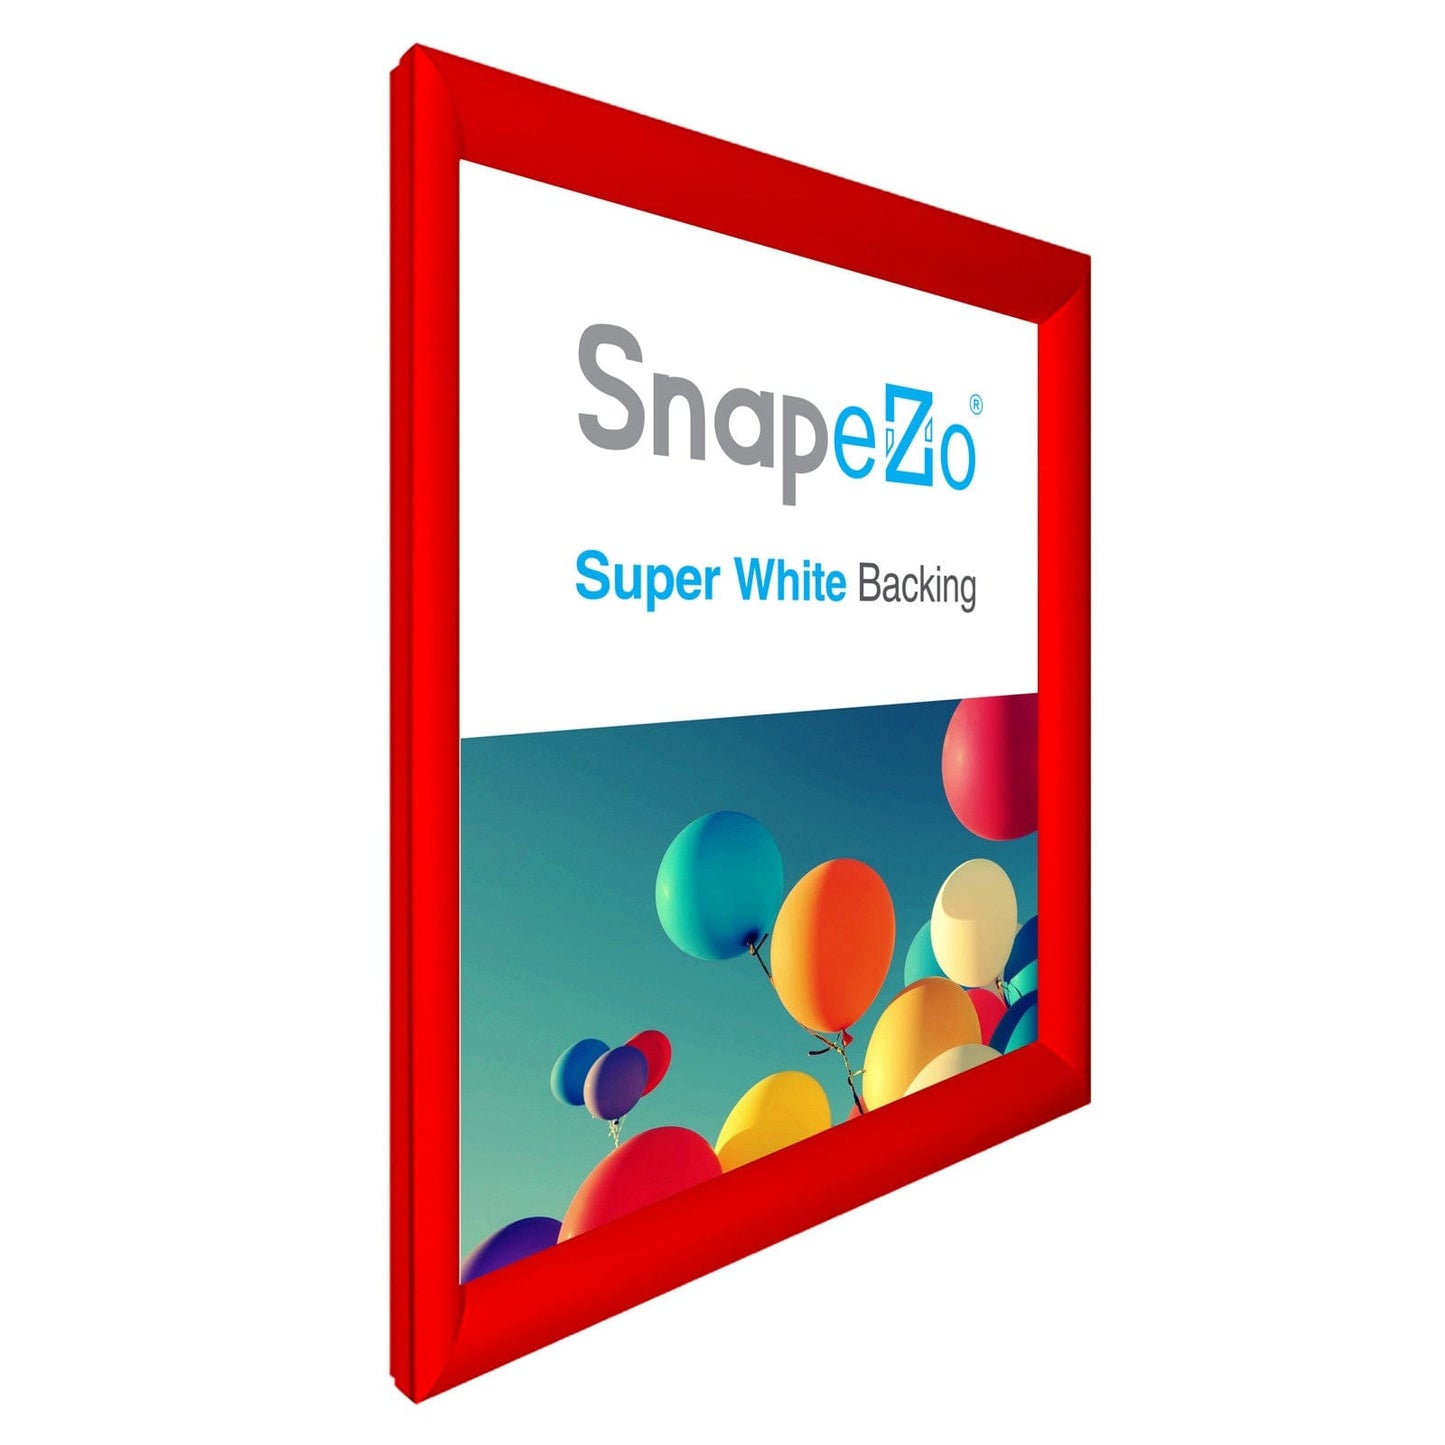 25x30 Red SnapeZo® Snap Frame - 1.2" Profile - Snap Frames Direct